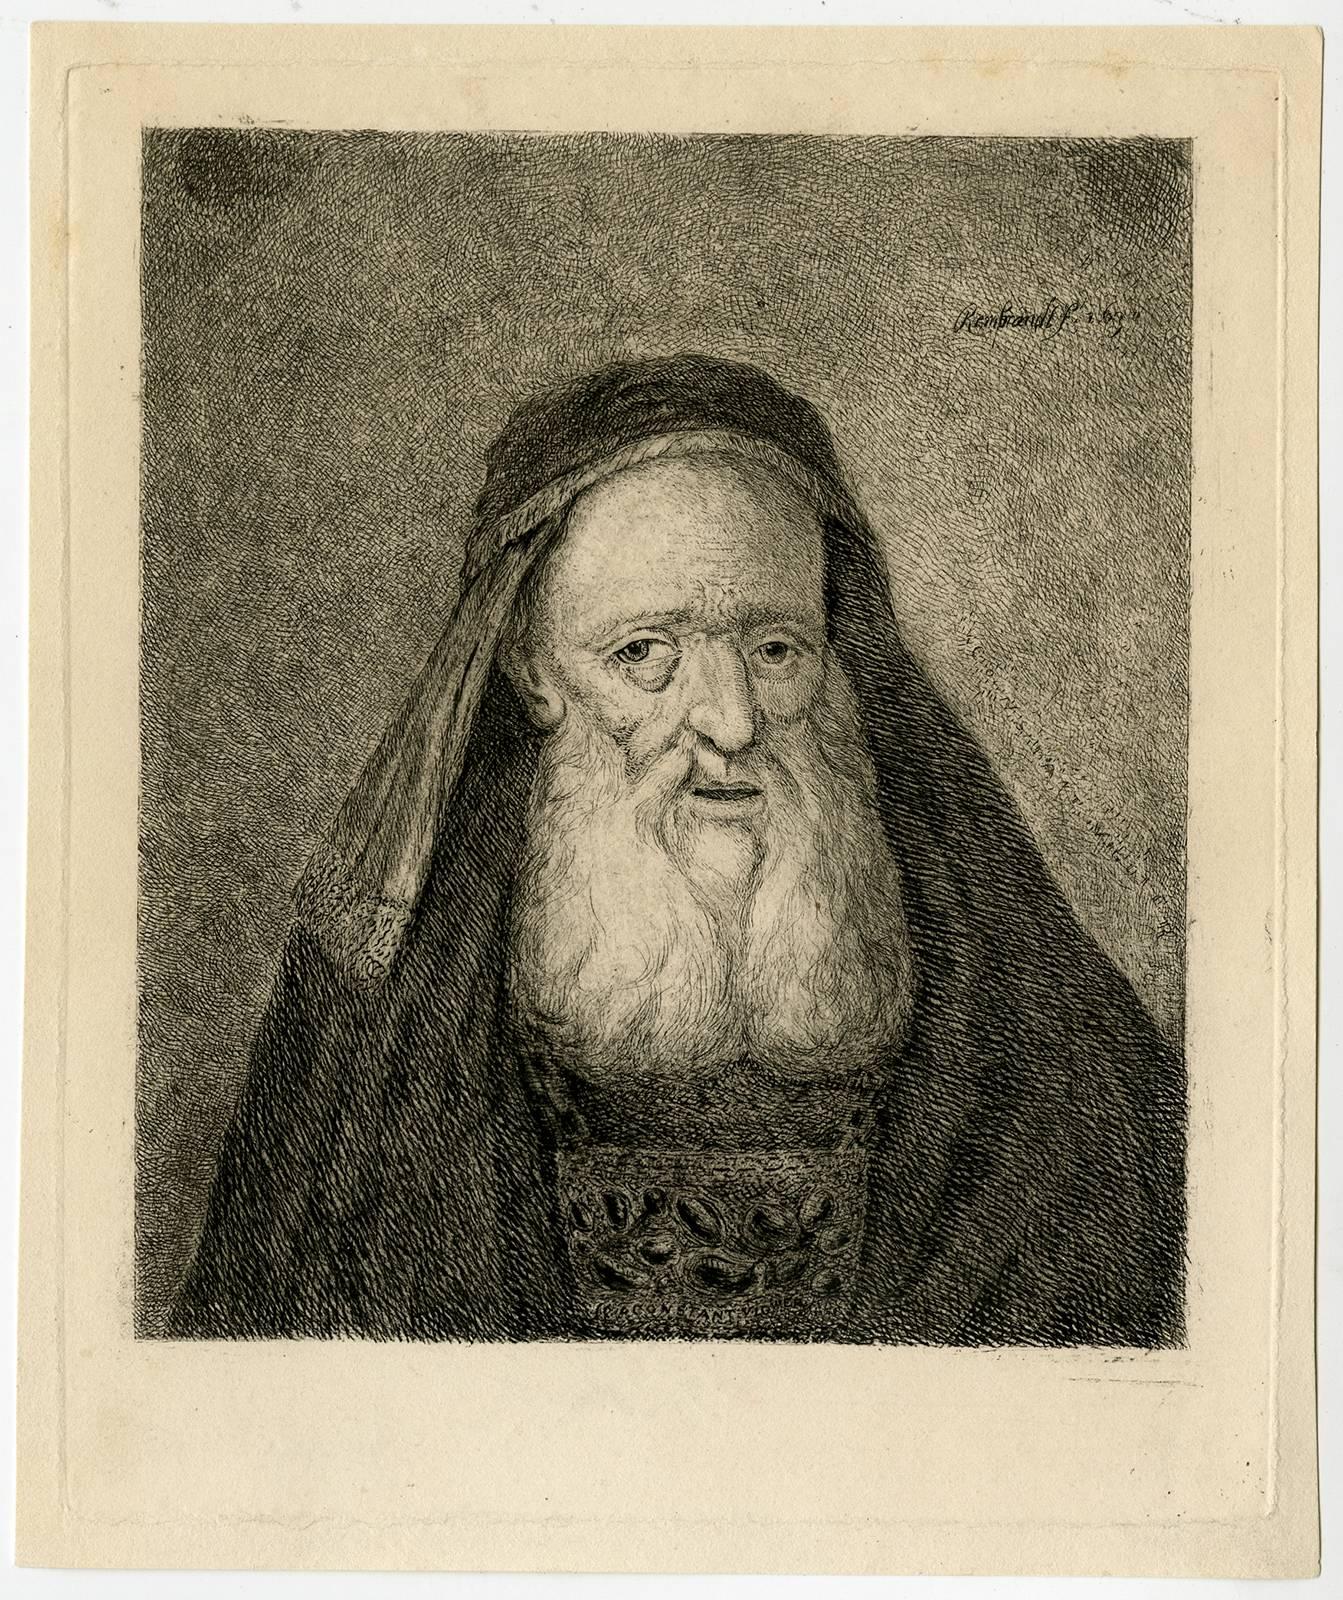 Unknown Portrait Print - Untitled - A robed and hooded old man.